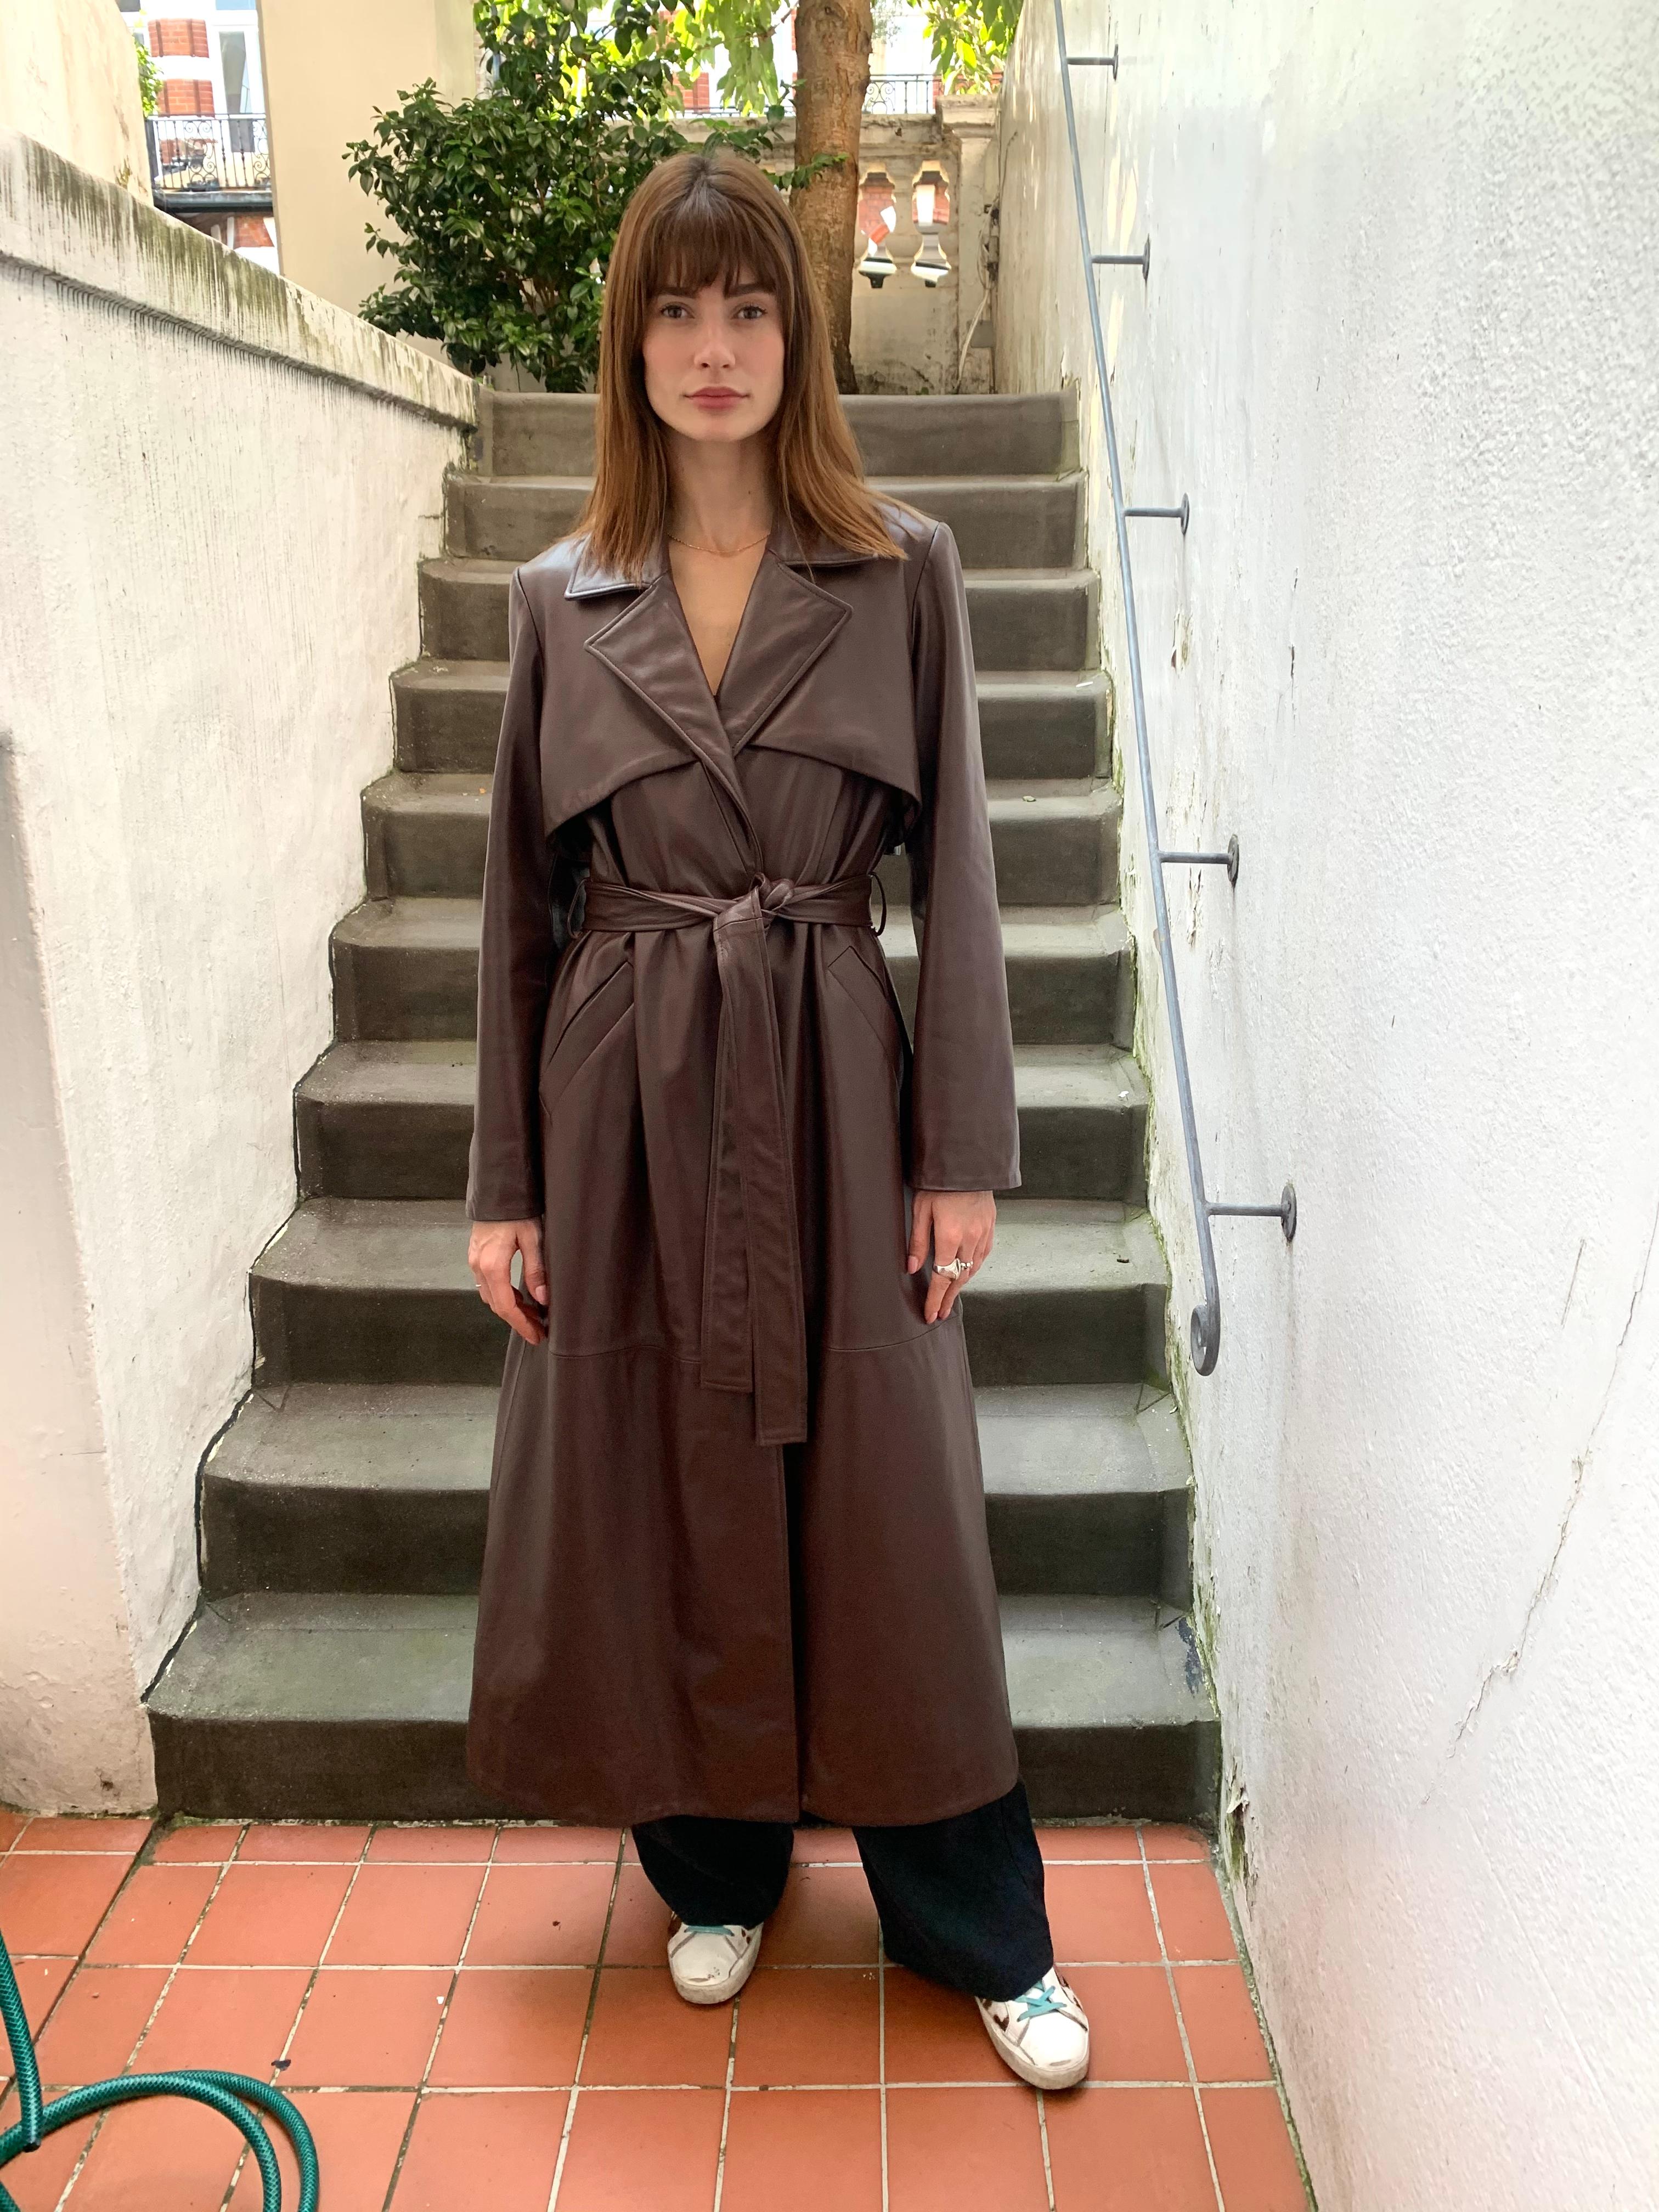 Women's Verheyen London Leather Trench Coat in Chocolate Brown - Size uk 8  For Sale